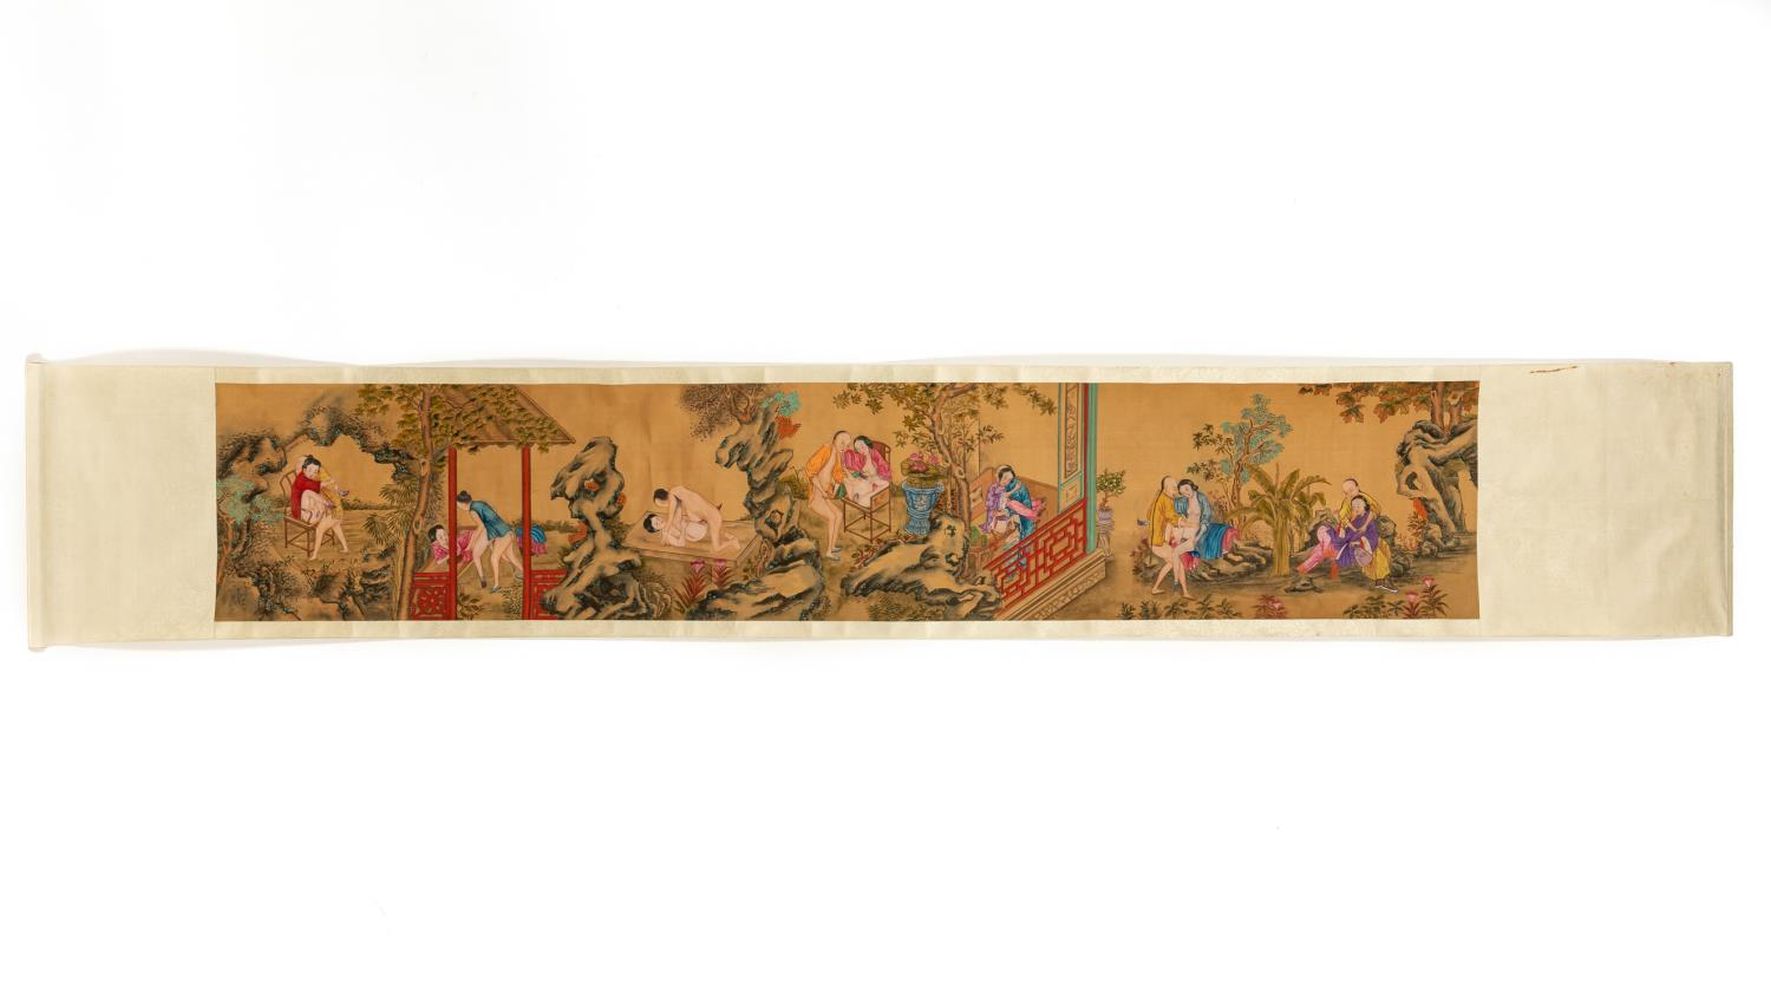 CHINESE EROTIC PAINTED SCROLL ON 35d9eb